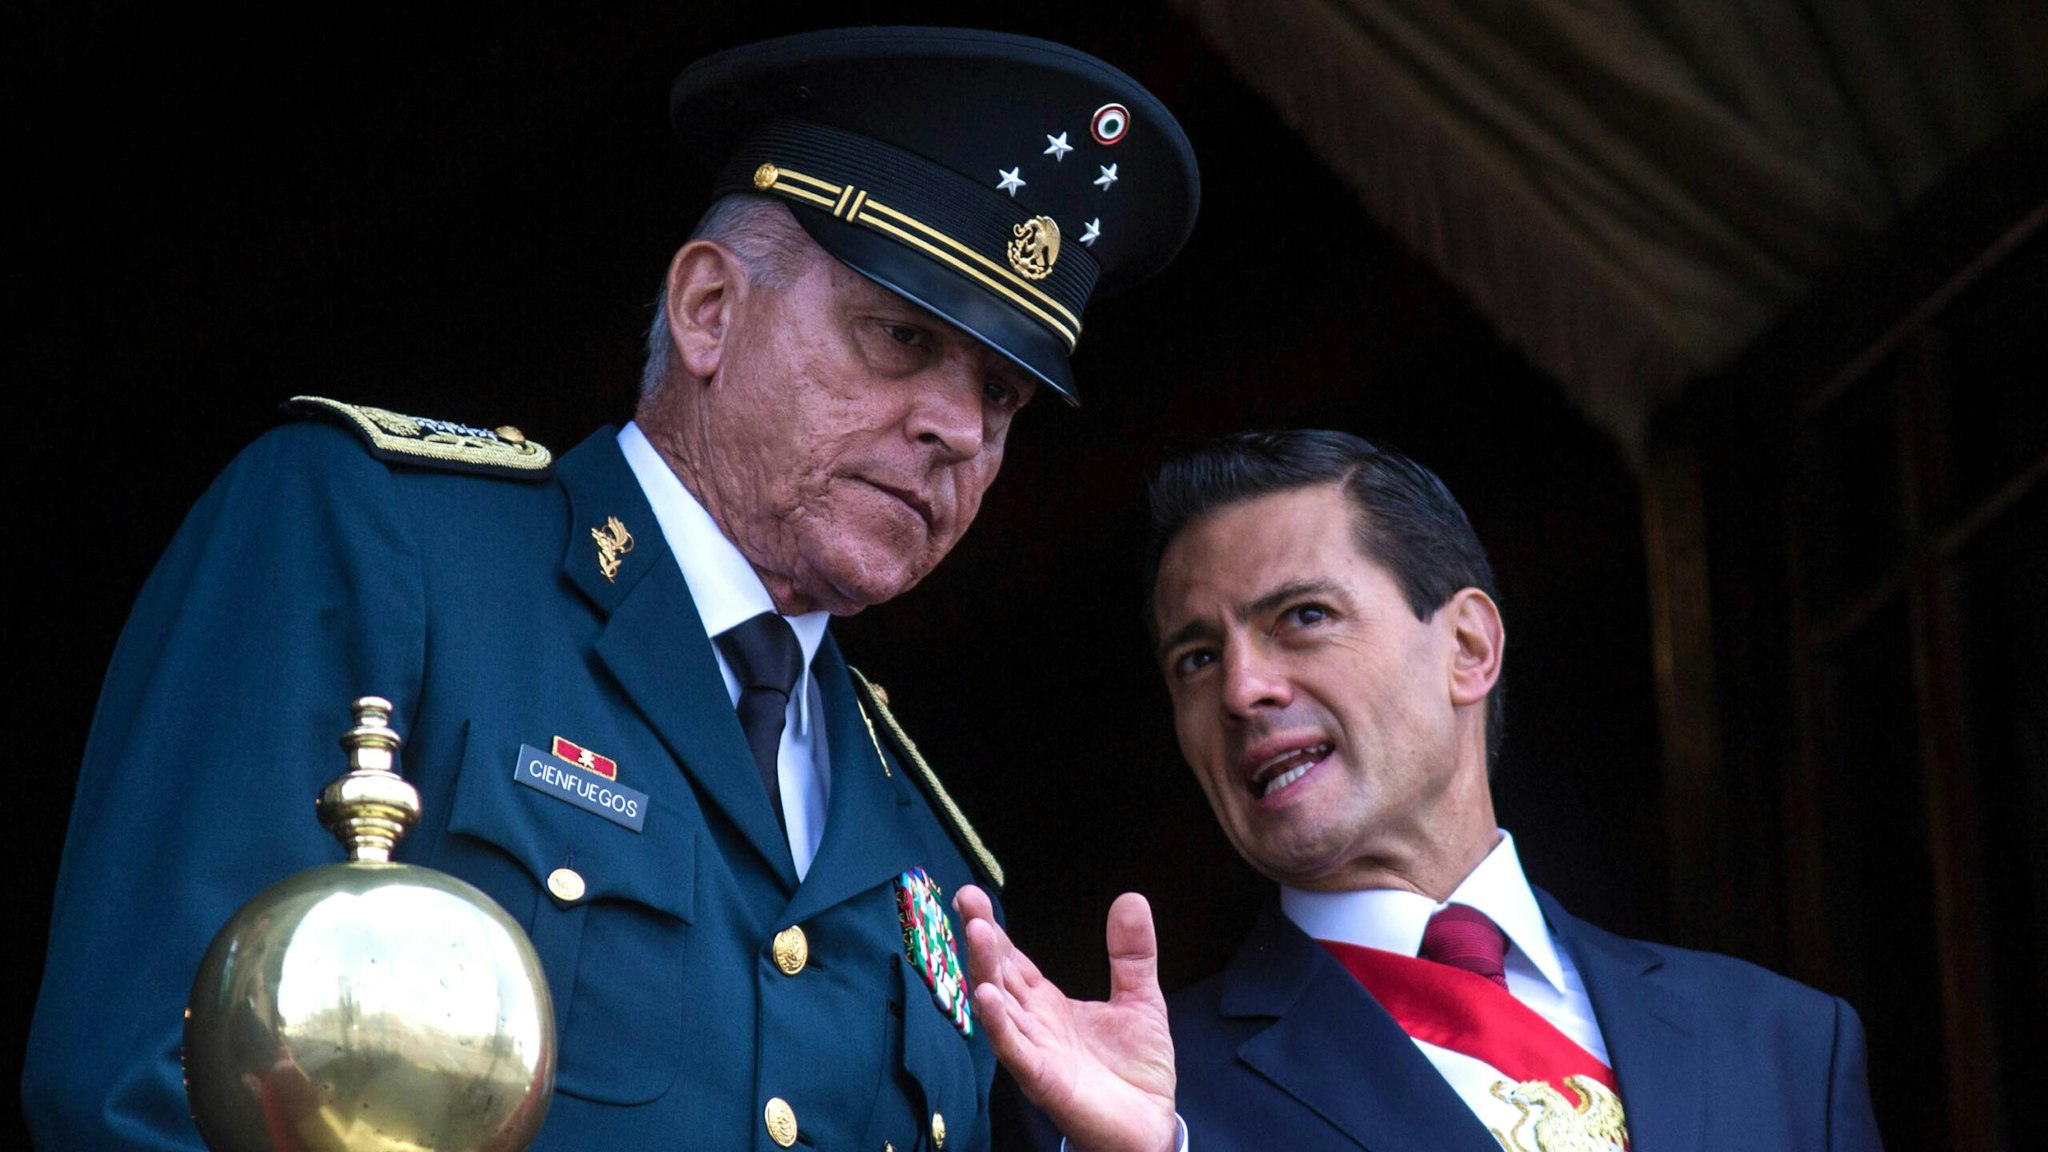 MEXICO CITY, MEXICO - SEPTEMBER 16 : President of Mexico Enrique Pena Nieto (R) and Defense Secretary Salvador Cienfuegos Zepeda watch the annual military parade at Zocalo main square, in Mexico City, Mexico on September 16, 2016. Mexico is marking the 206th anniversary of its independence.